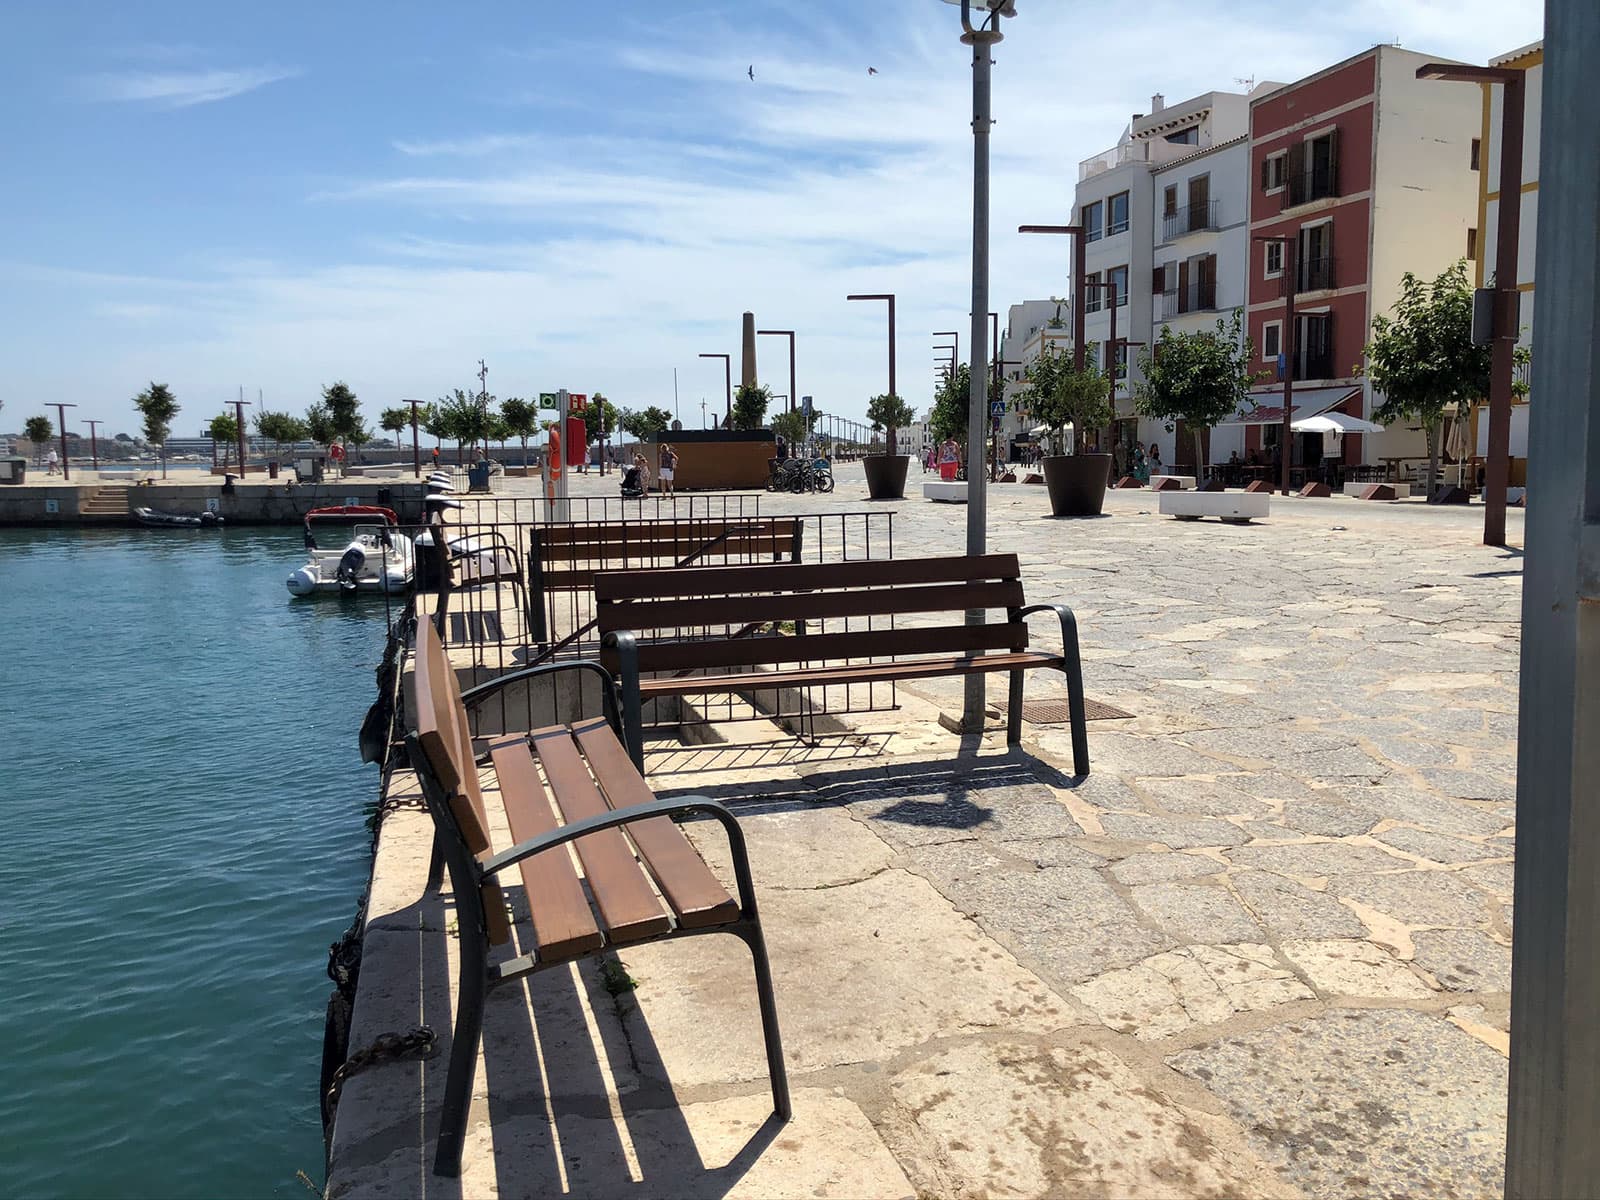 Wooden benches in the port of Ibiza - 2021